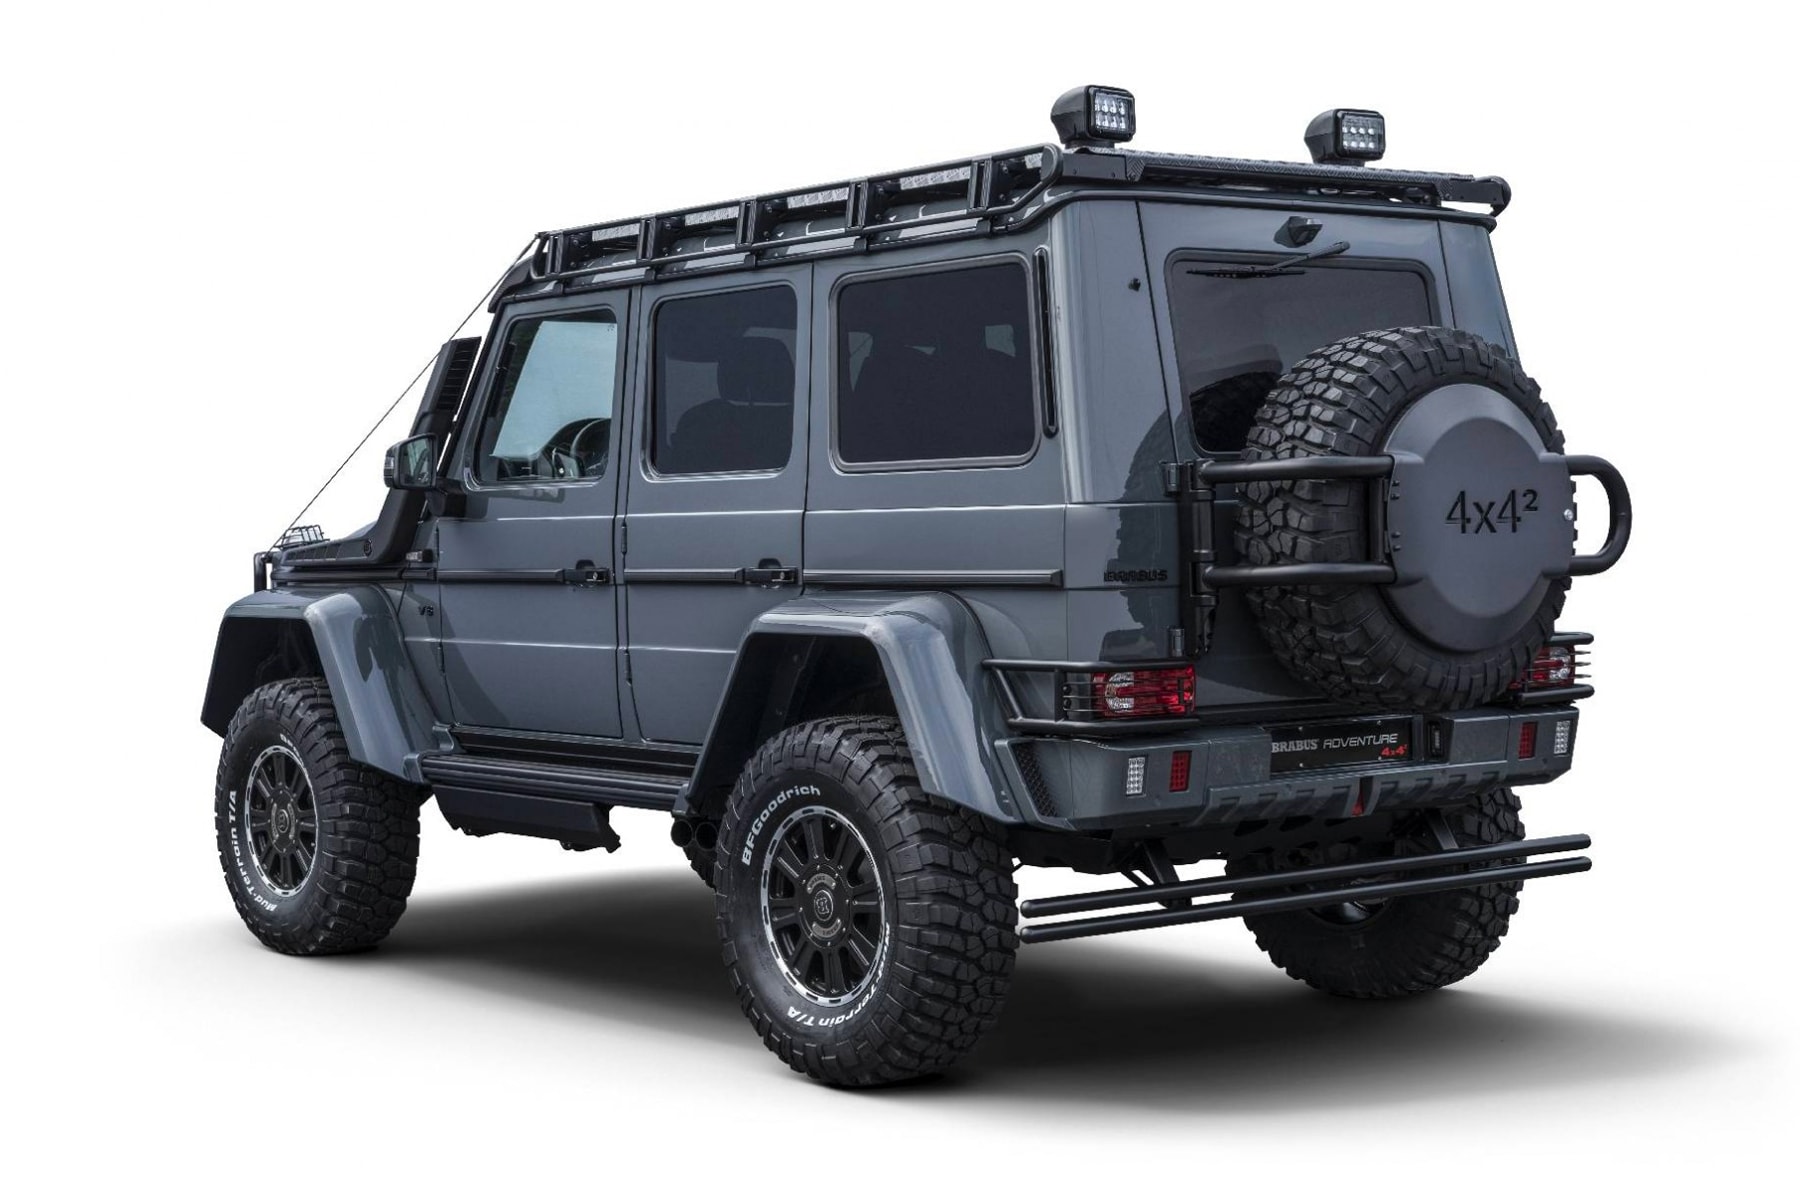 BRABUS G-500 Adventure 4x4 Off Road Vehicle Mercedes SUV Pricing Information Release